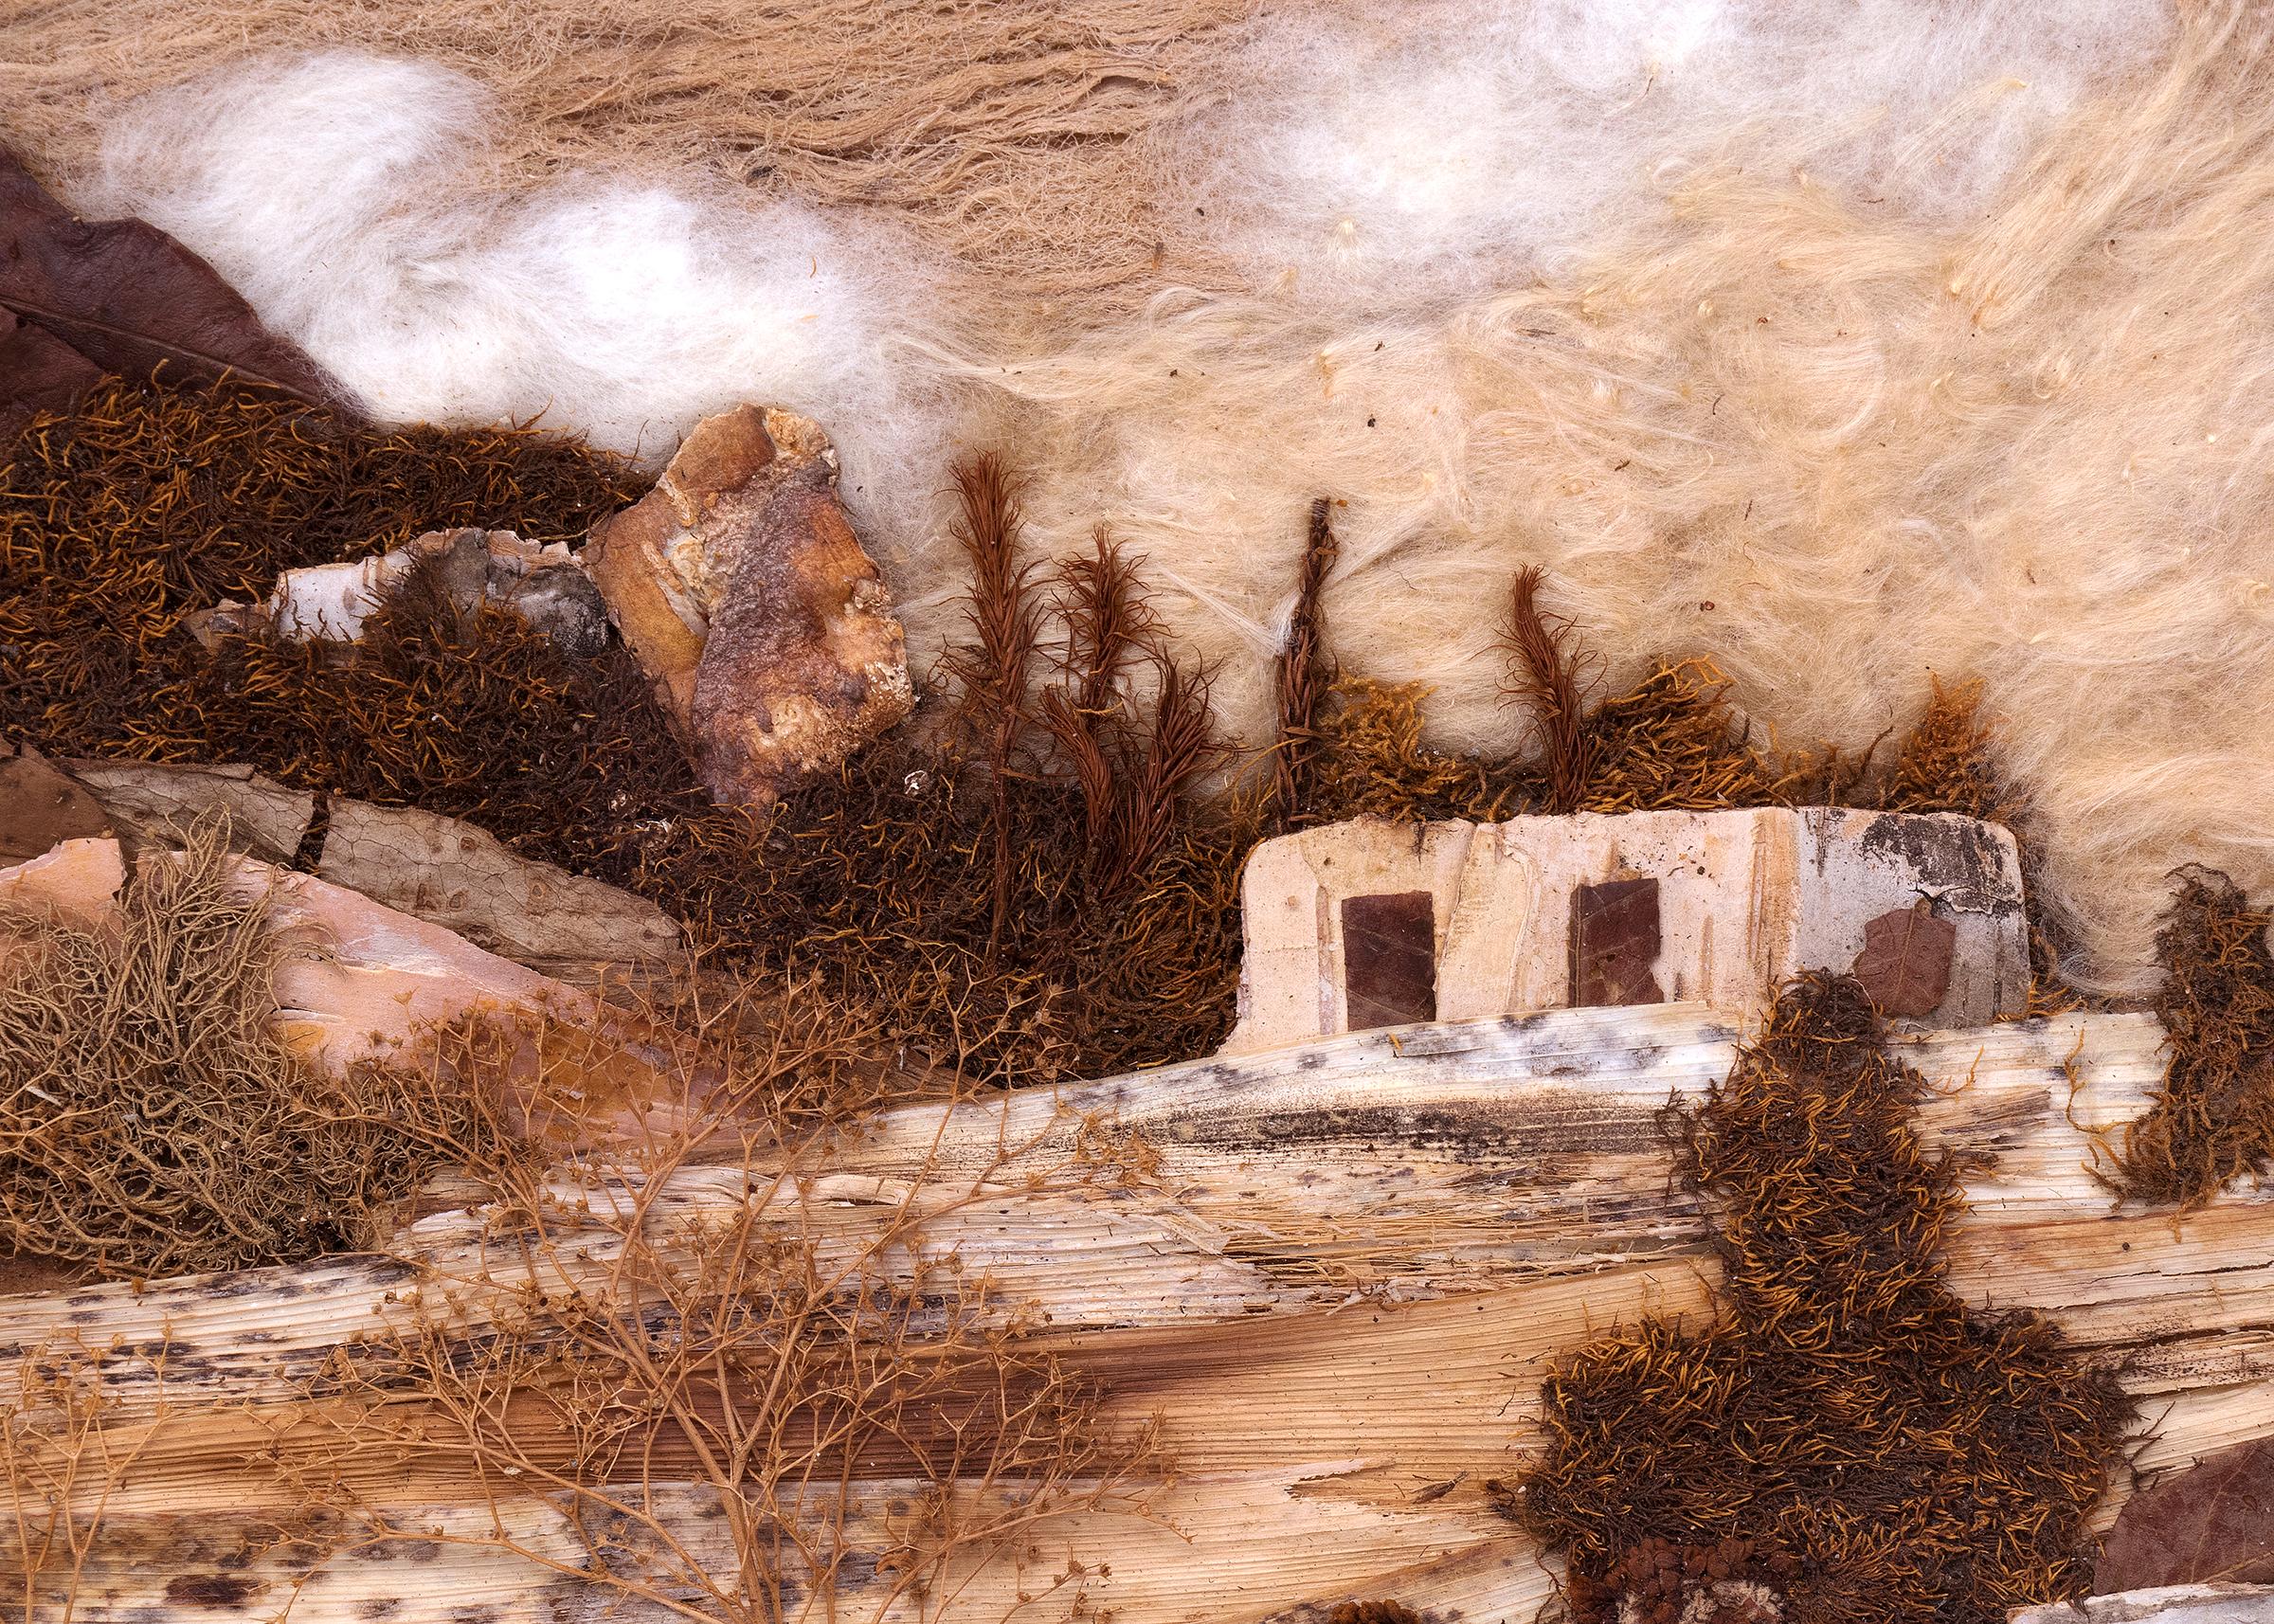 Hillside, New Mexico, Landscape with Adobe, Botanical Mixed Media Assemblage - Brown Landscape Painting by Pansy Stockton